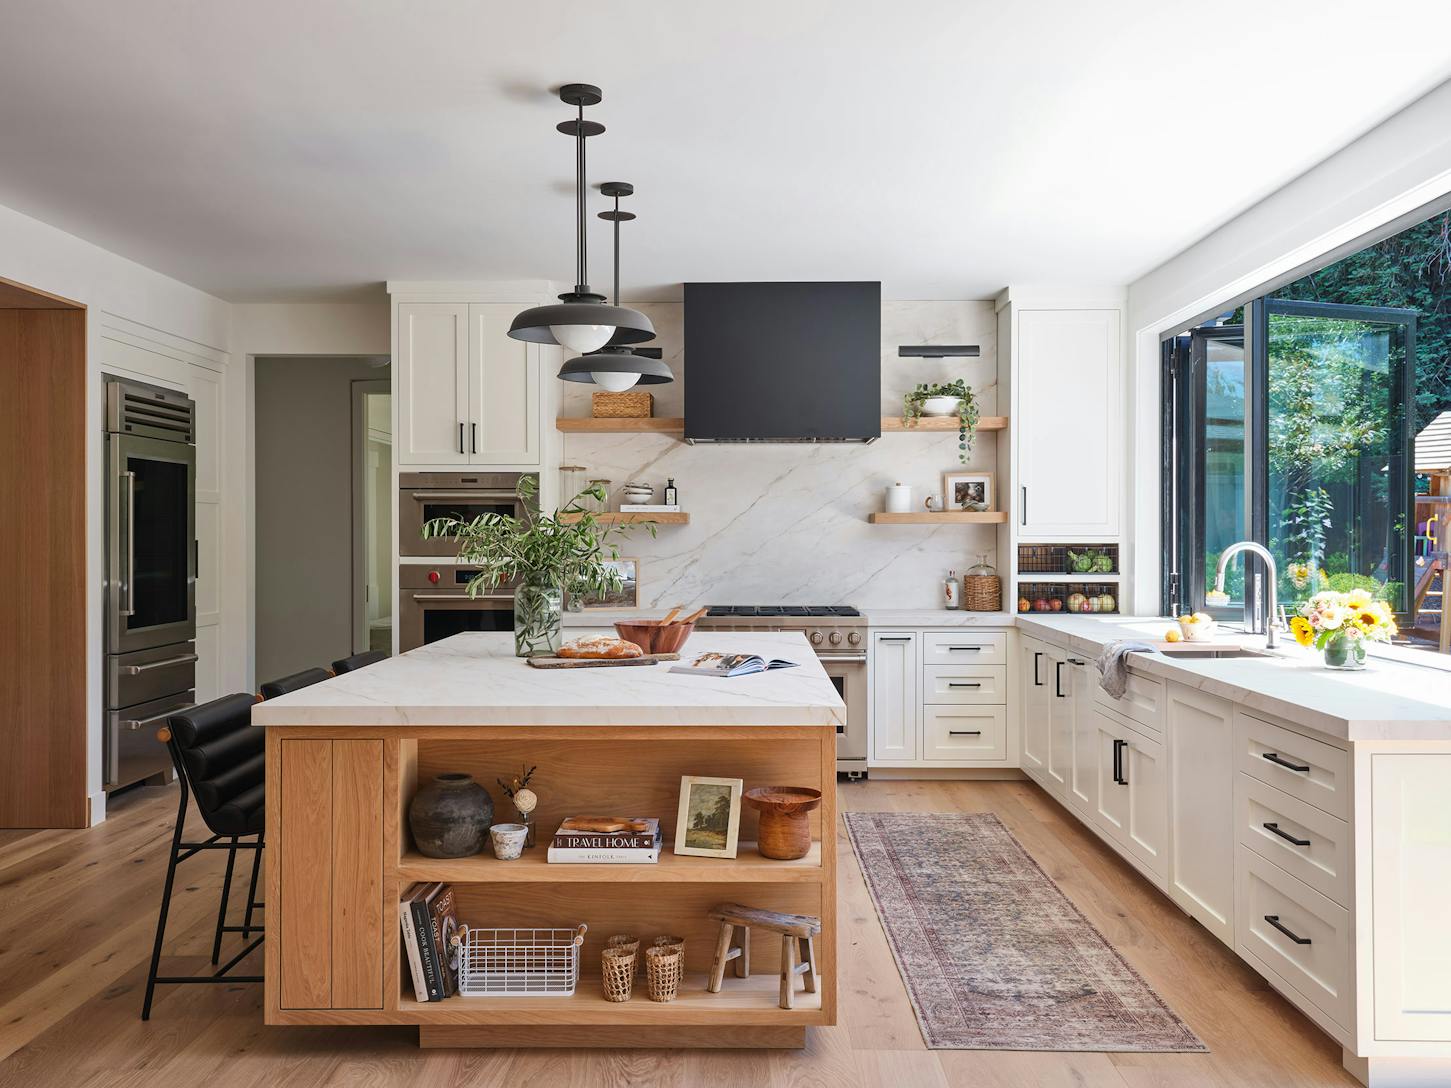 A modern kitchen with a view of the outdoors through a kitchen transition systems